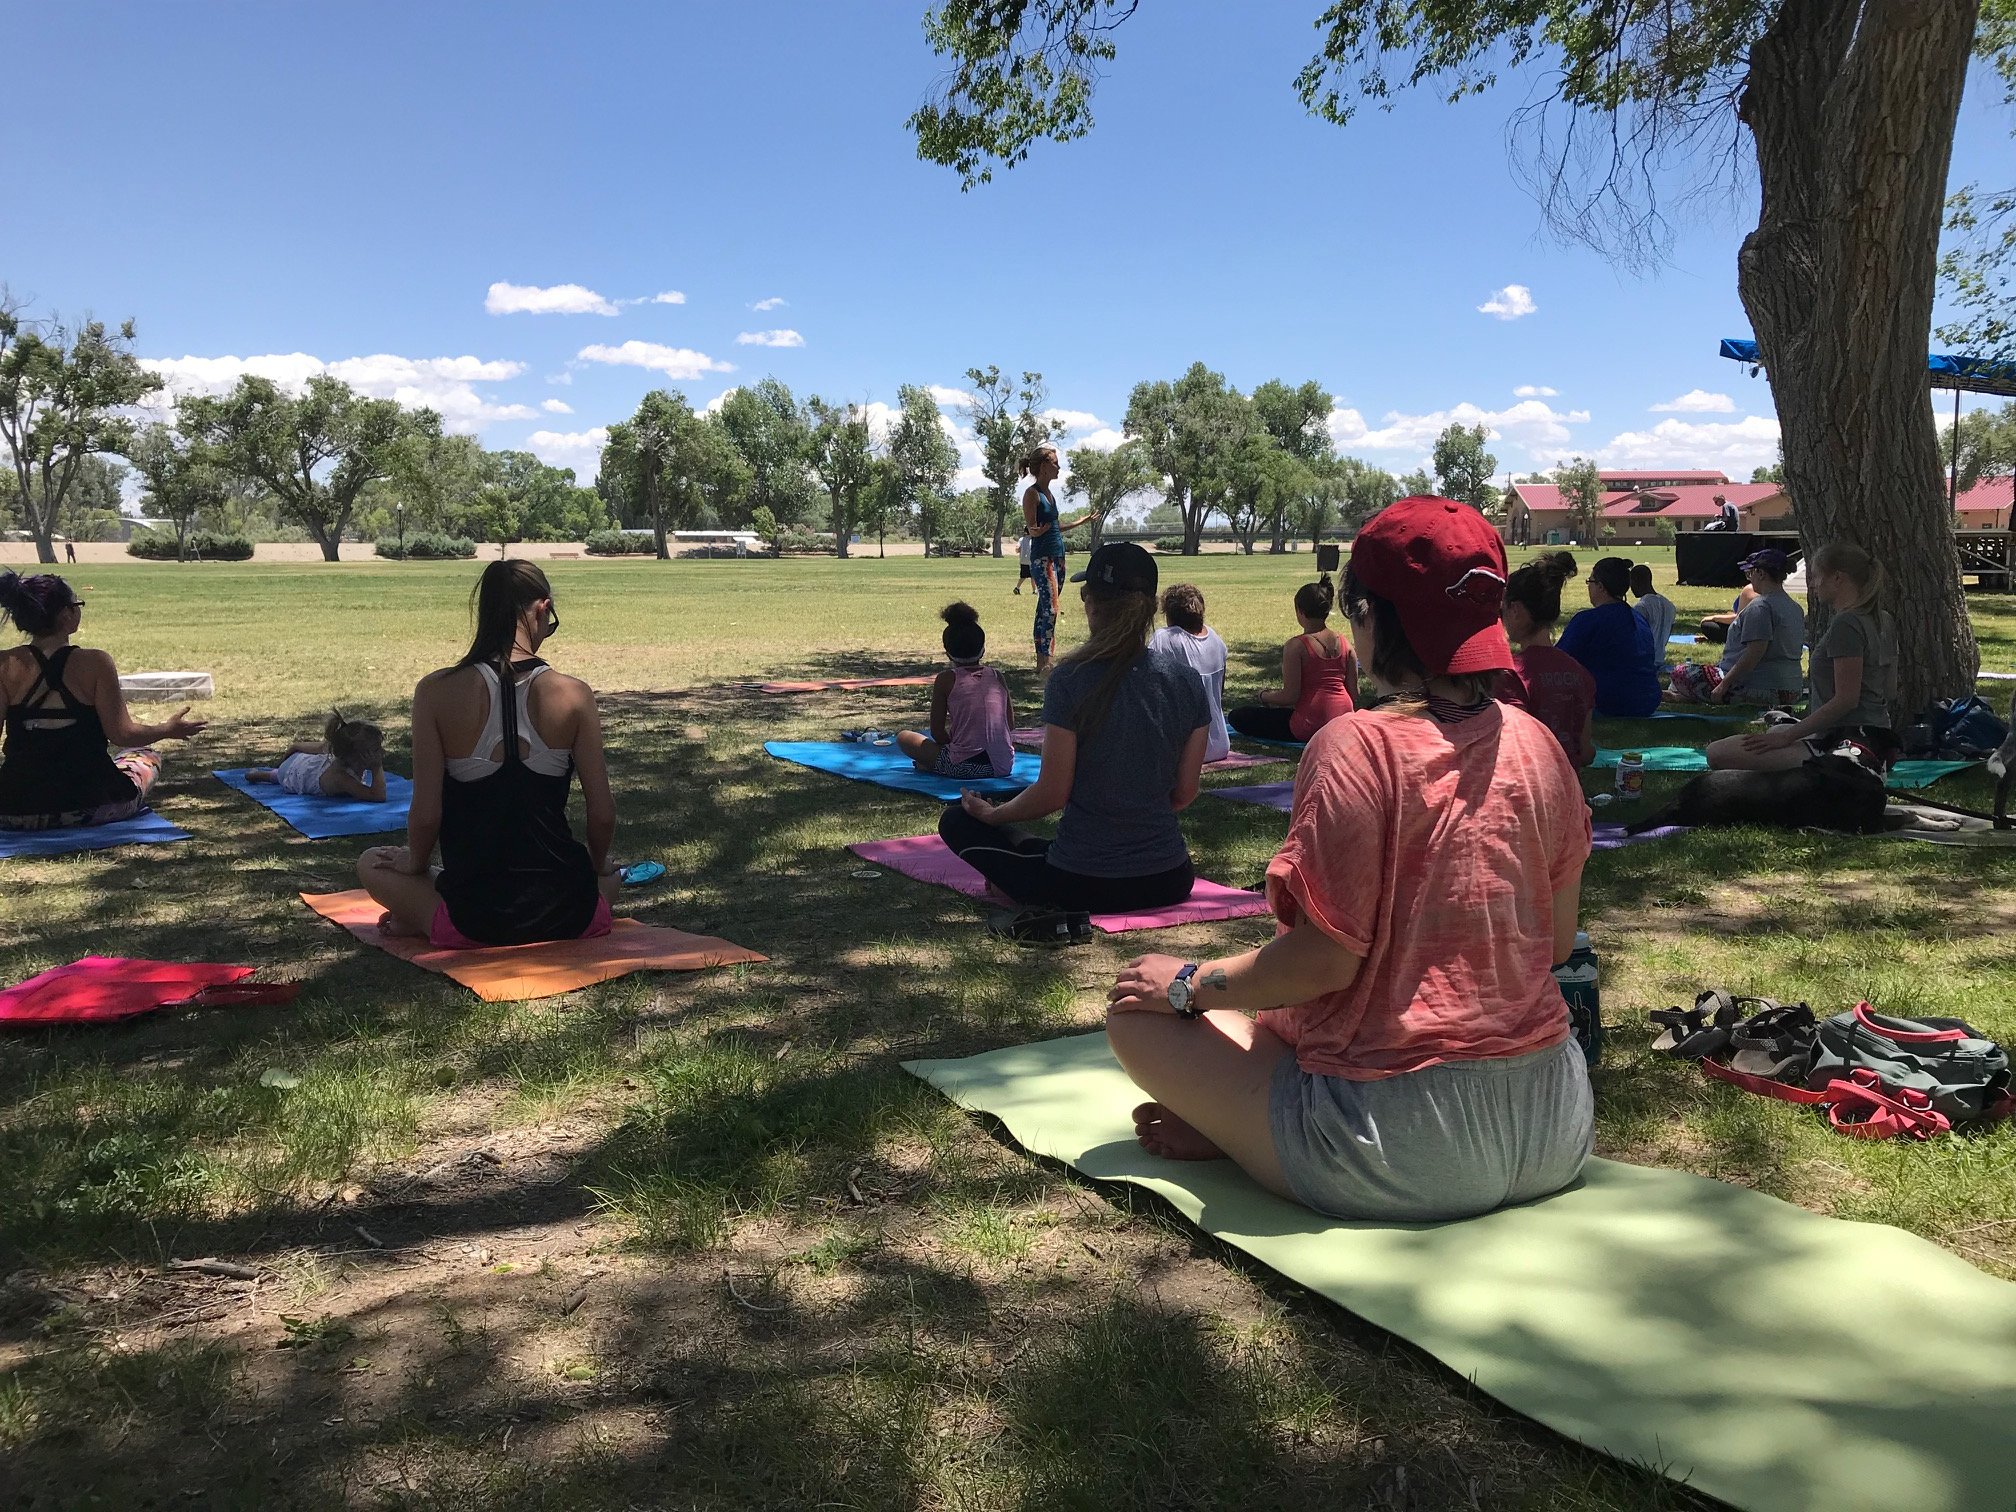 People sitting on a shaded lawn on yoga mats for the weekly Weekends on the Rio community activities in Alamosa